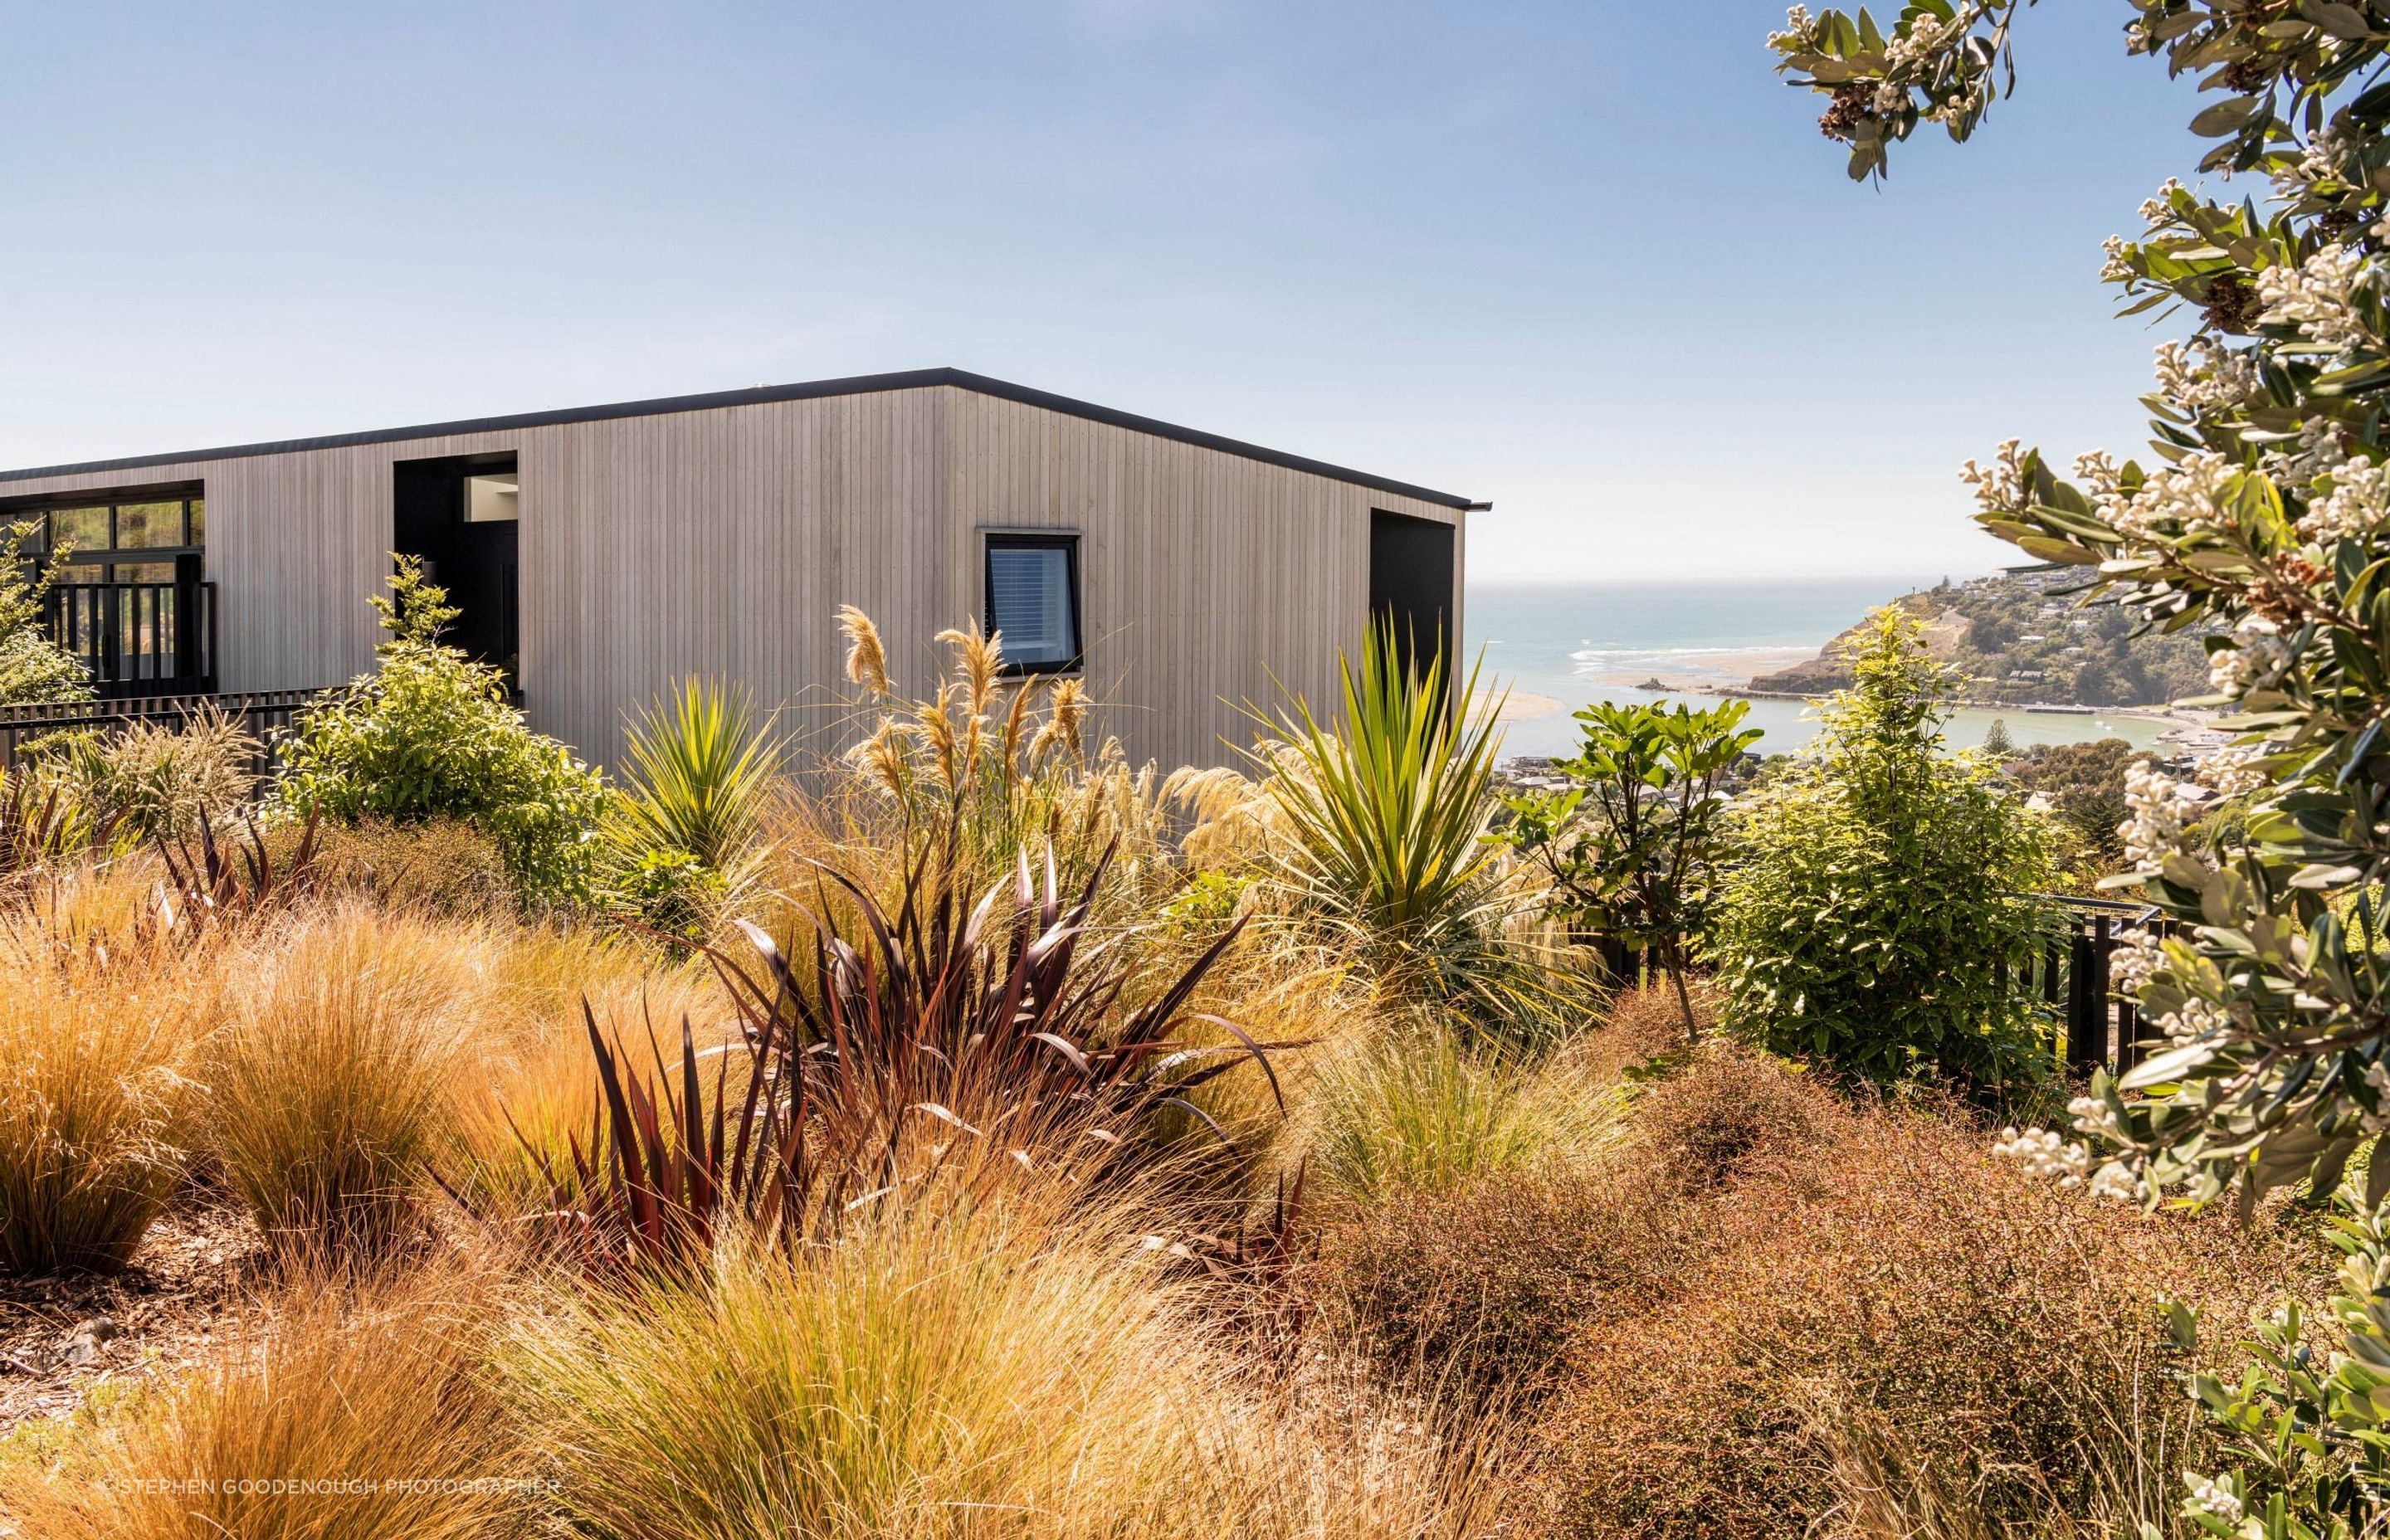 A wonderful example of naturalistic planting with some iconic natives in this hillside home in Christchurch. | Photography: Stephen Goodenough Photographer